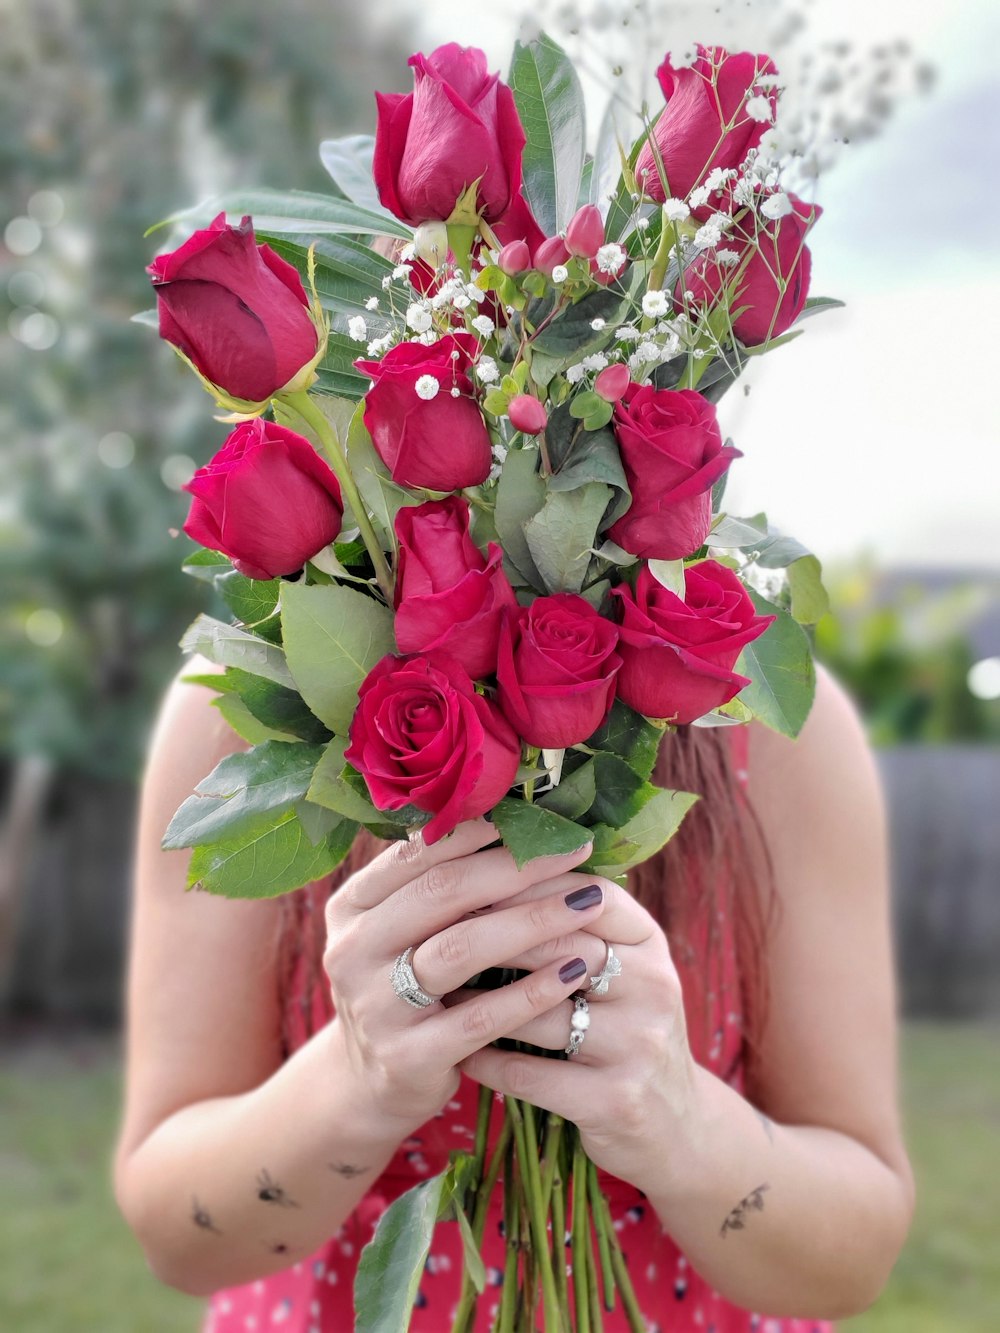 person holding bunch of rose